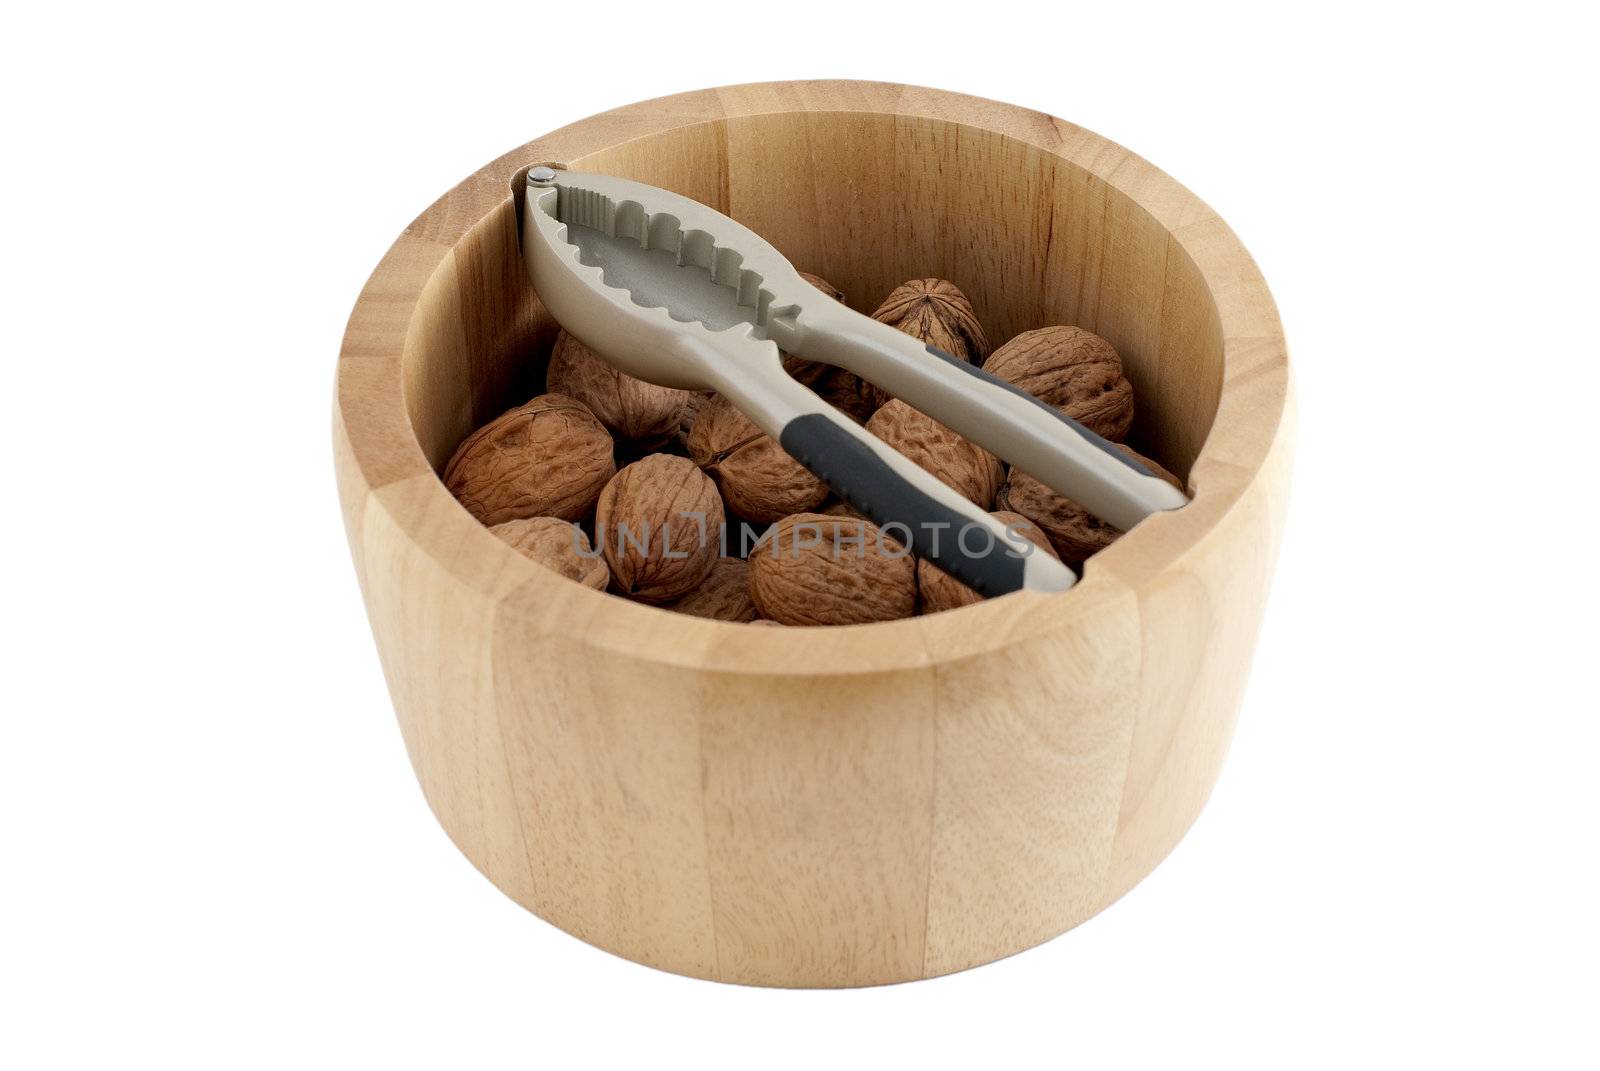 Food background, macro shot of a group of walnuts and a wood basket with a nutcracker.